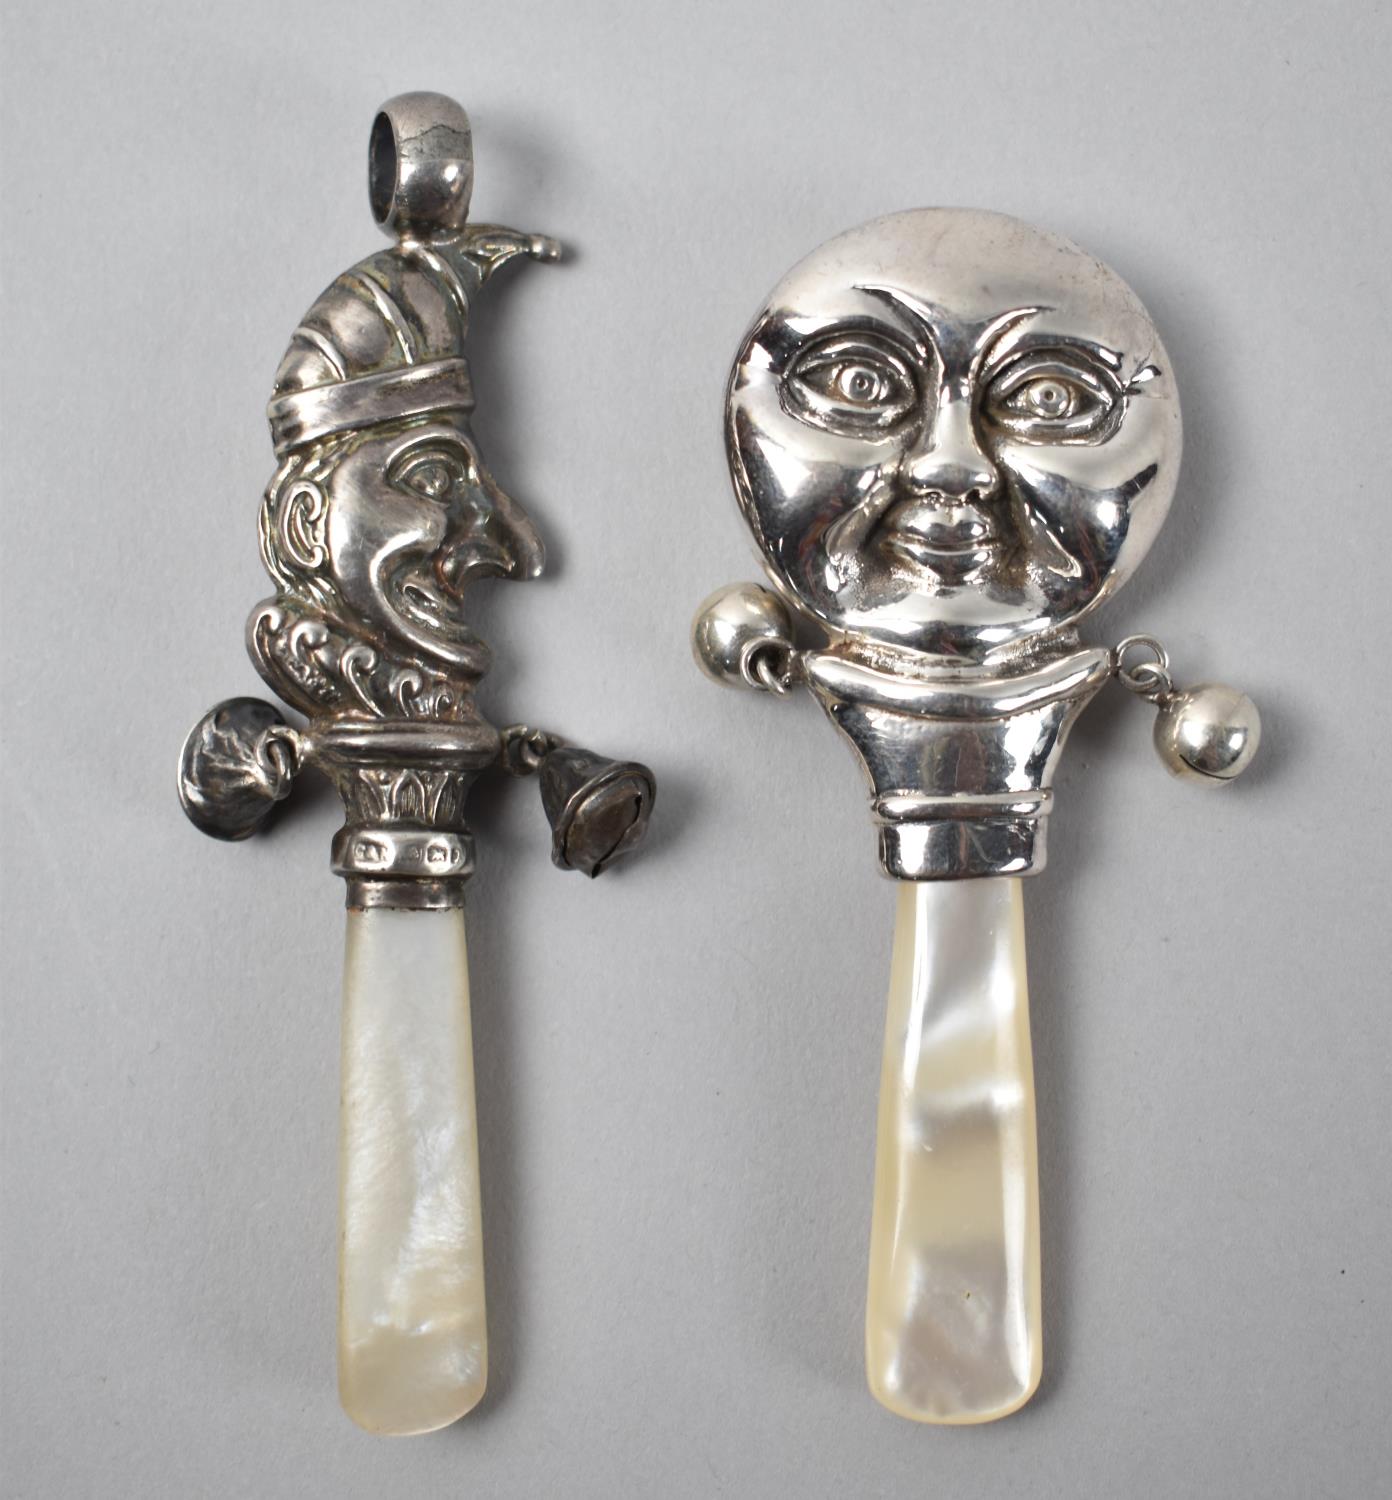 An Edwardian Silver and Mother of Pearl Baby's Teether/Rattle in the Form of Mr Punch together